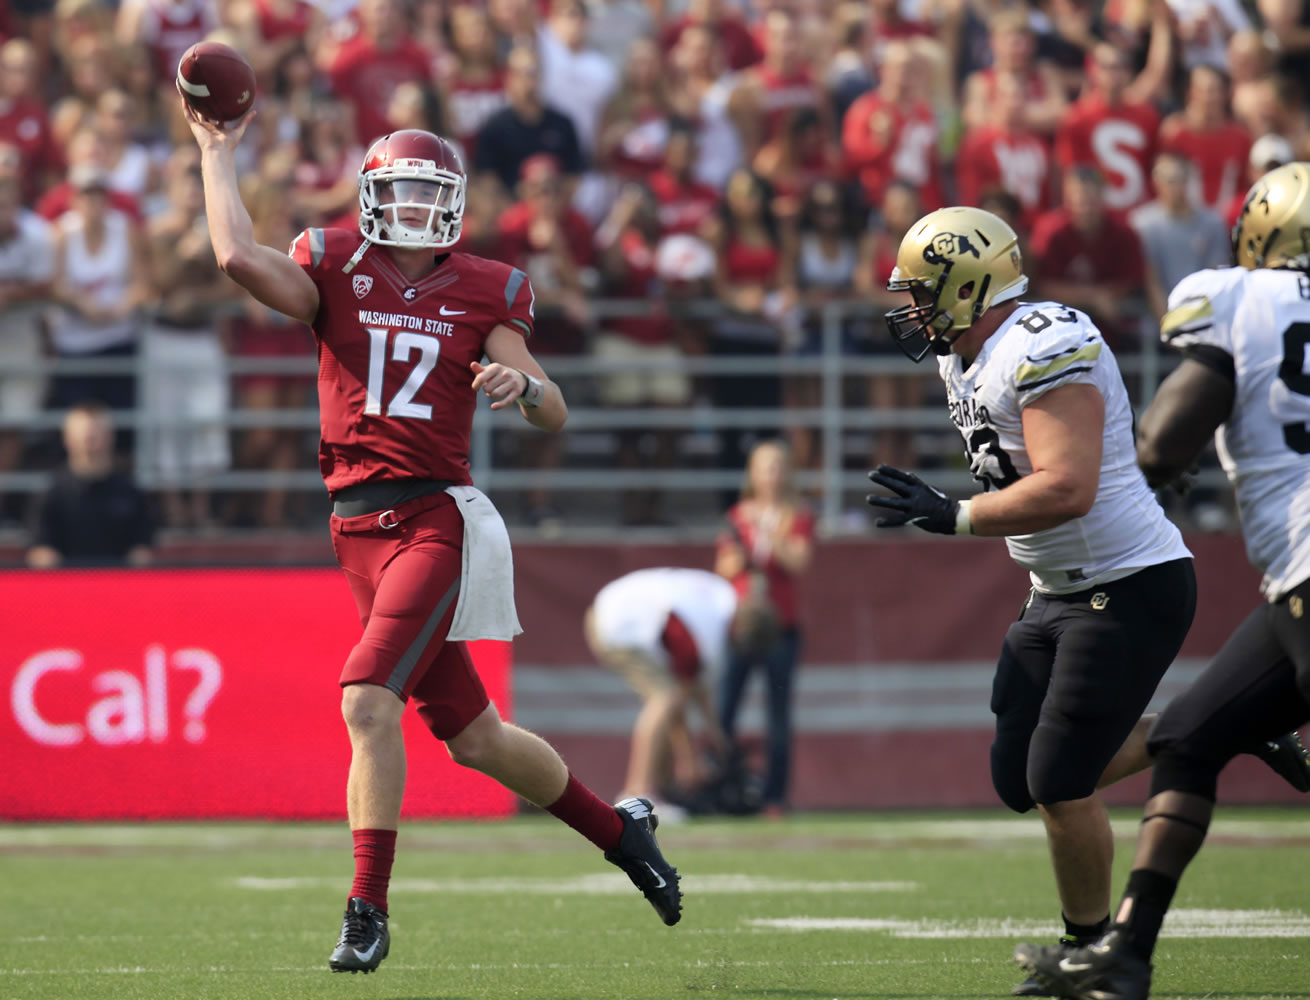 Washington State quarterback Connor Halliday (12) throws while pursued by Colorado defensive end Will Pericak (83) and defensive tackle Nate Bonsu during the first quarter Saturday.